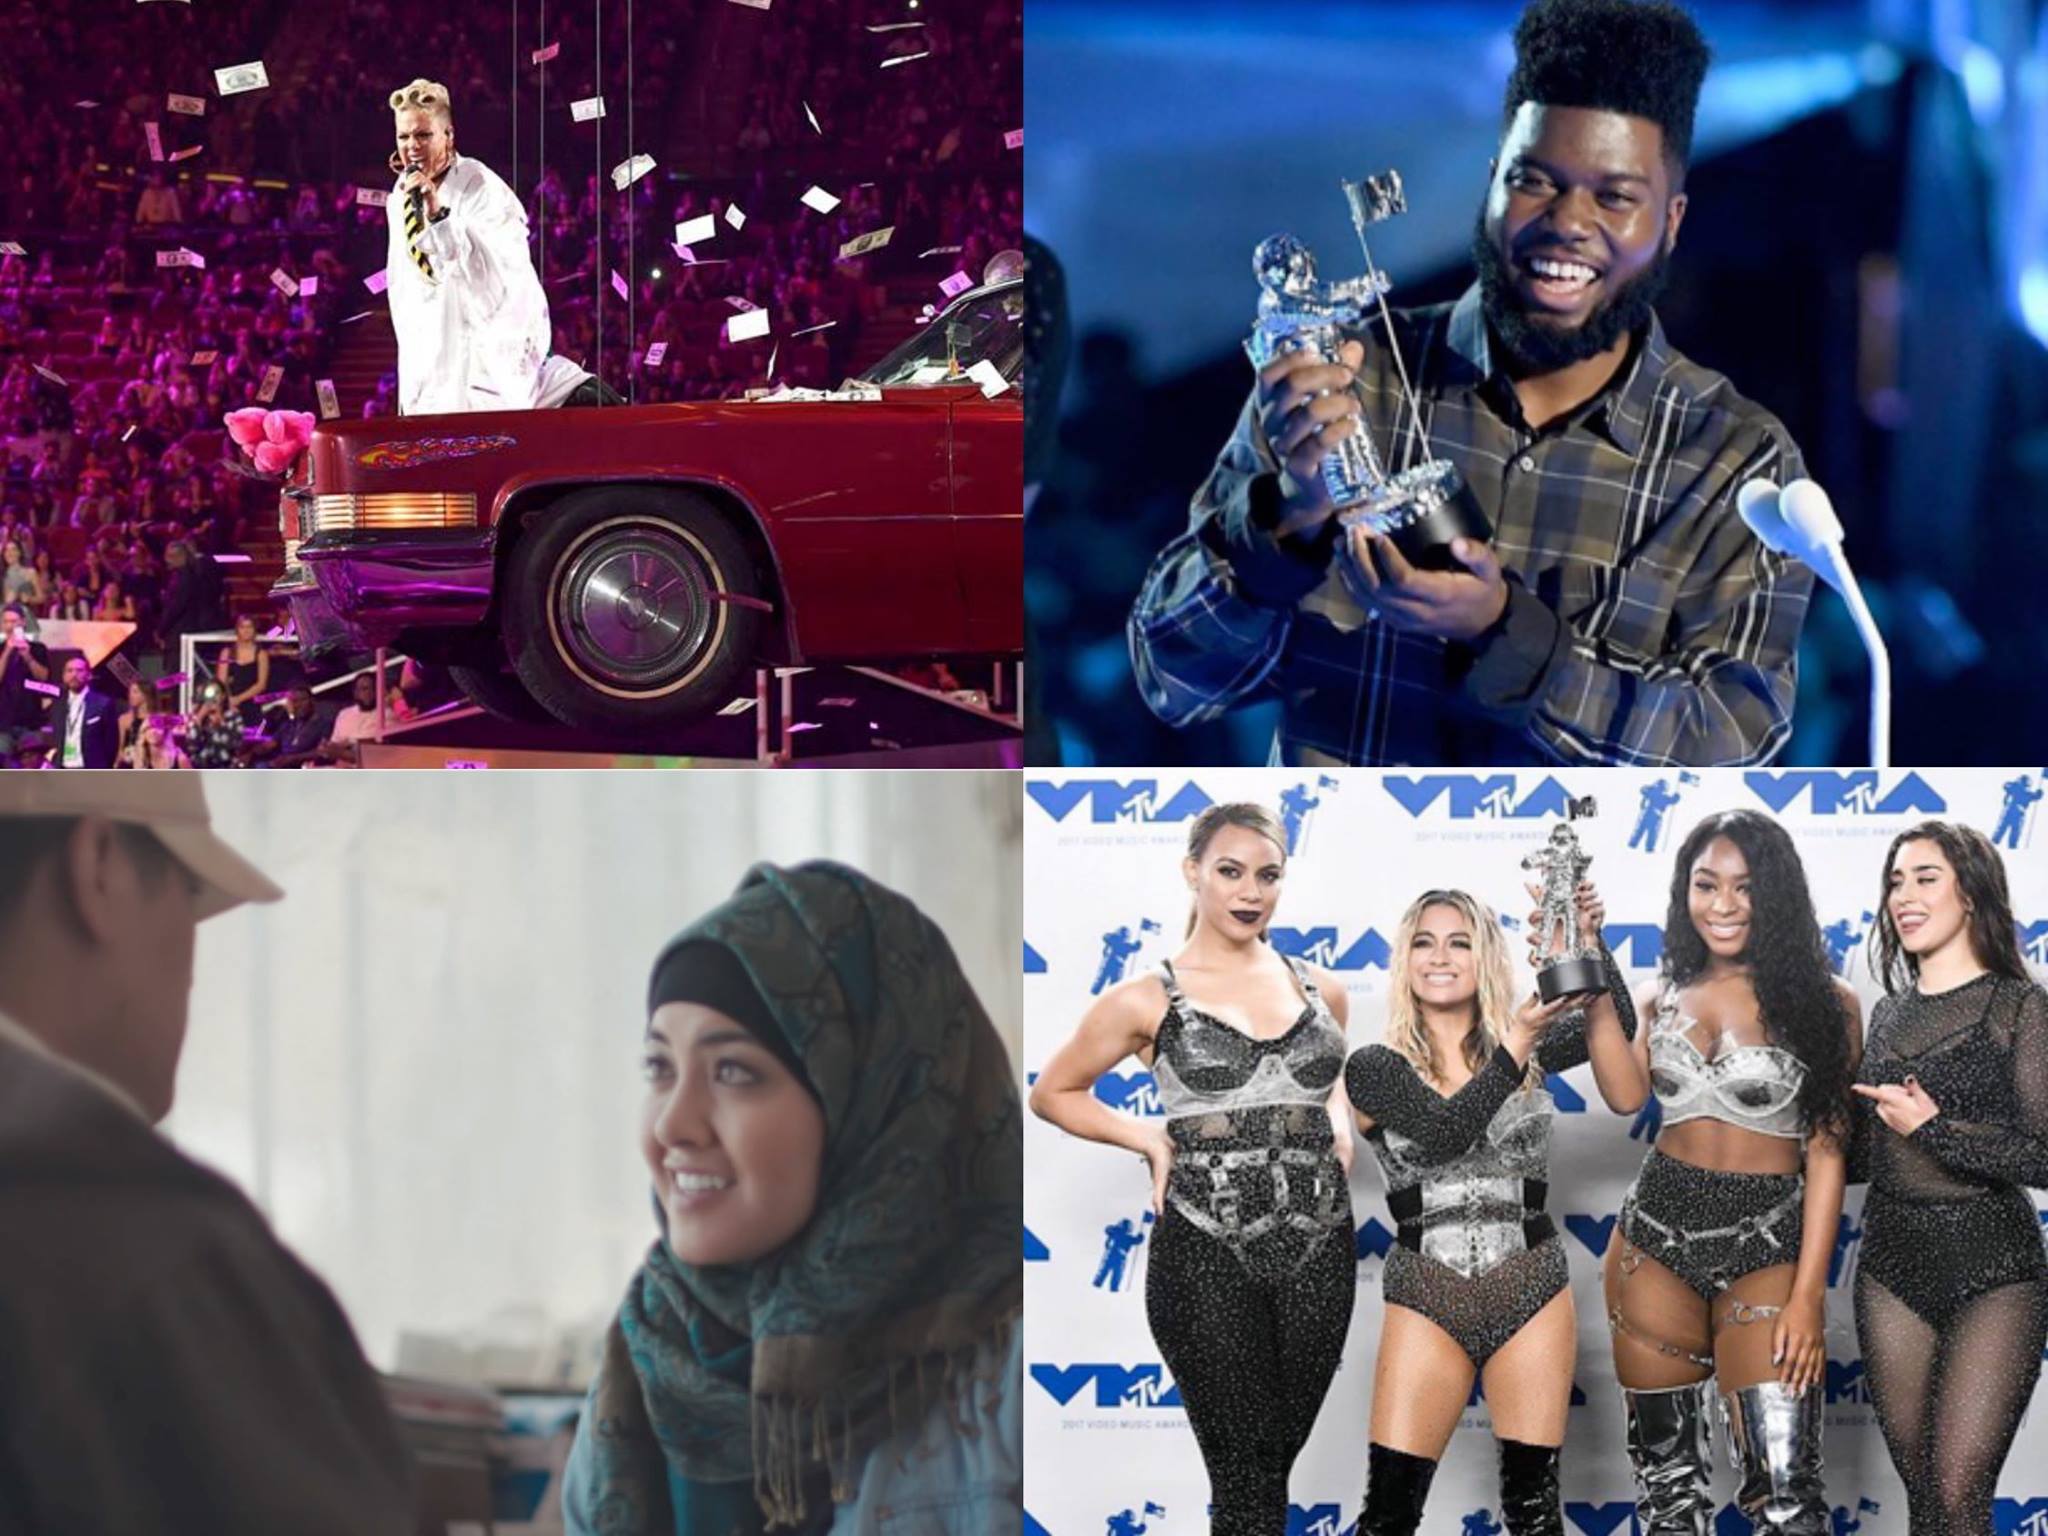 CONGRATULATIONS TO OUR SONY MUSIC ARTISTS ON THEIR 2017 MTV VMA WINS!